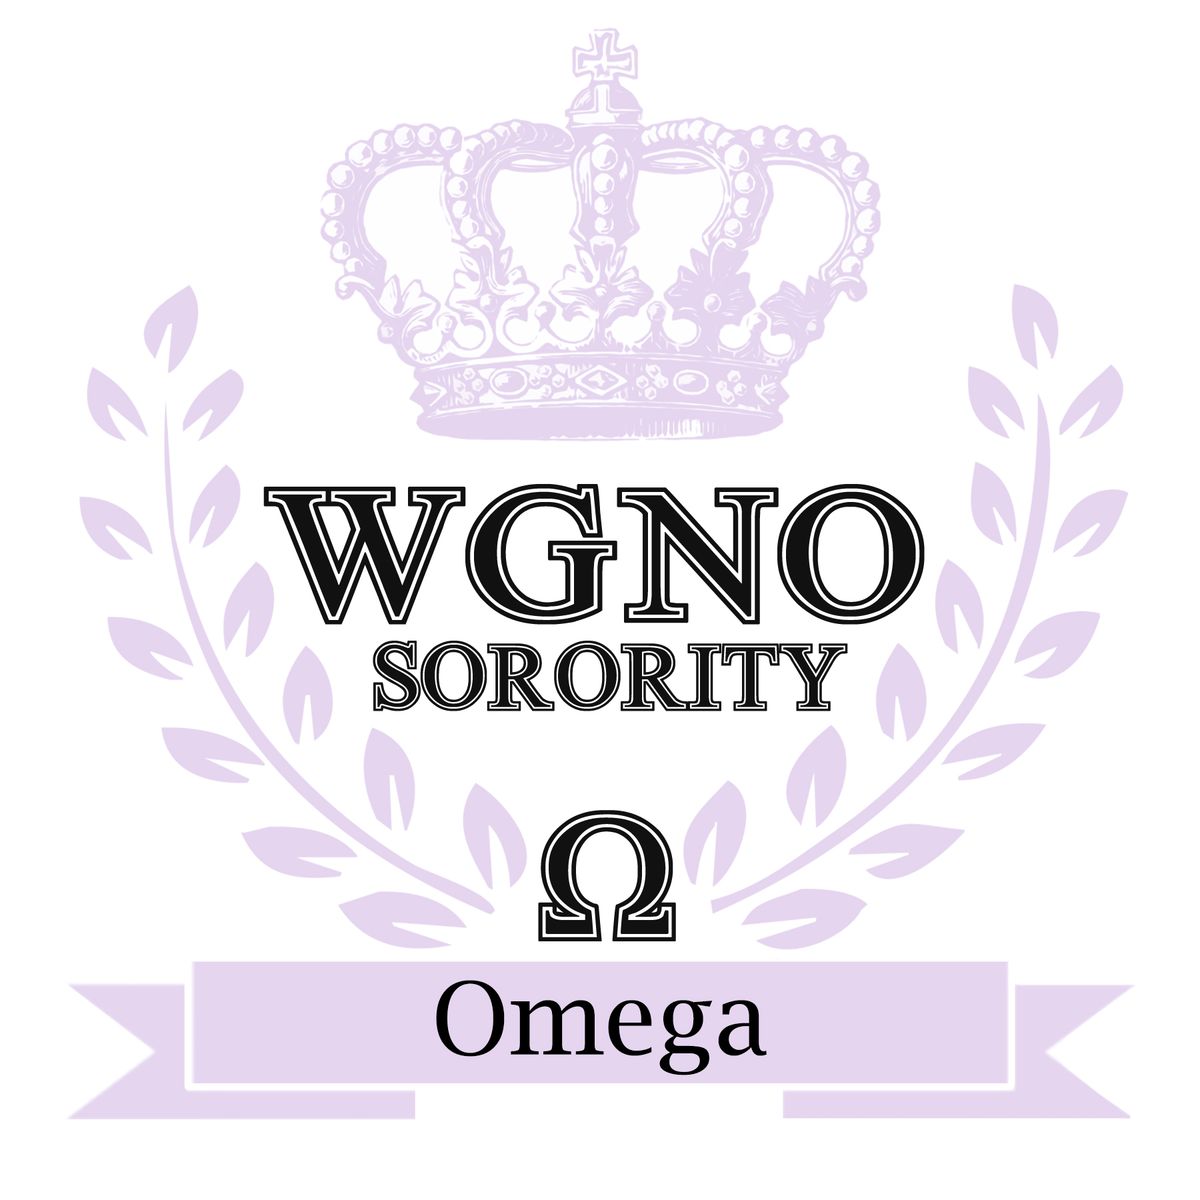 OMEGA CYPRESS 5\/23 Women's Networking Group